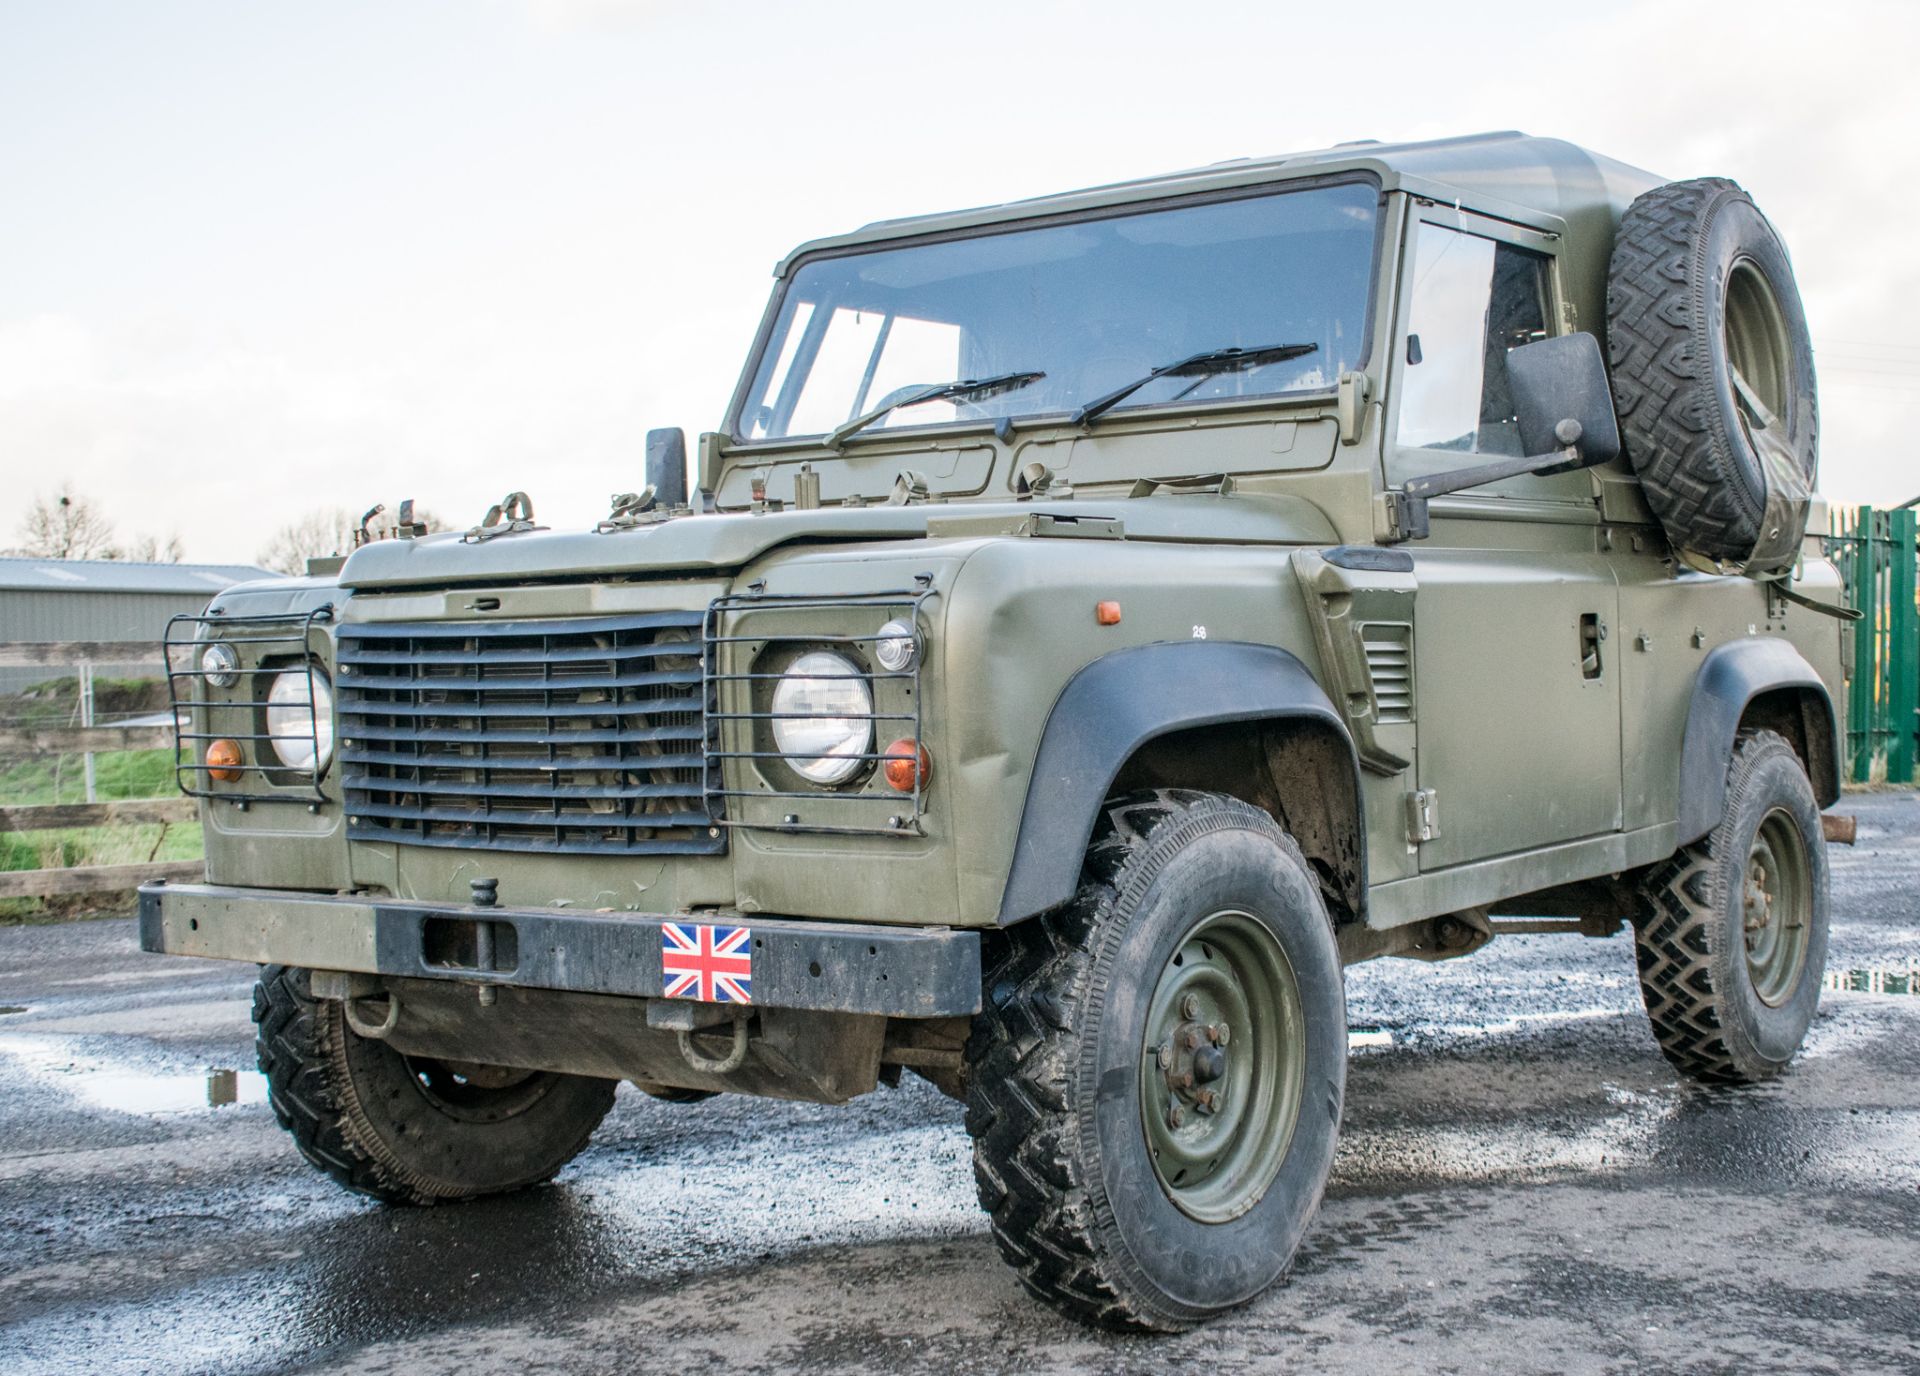 Land Rover Defender 90 Wolf 300 TDI 4wd TUL hard top utility vehicle (EX MOD) Date into Service: